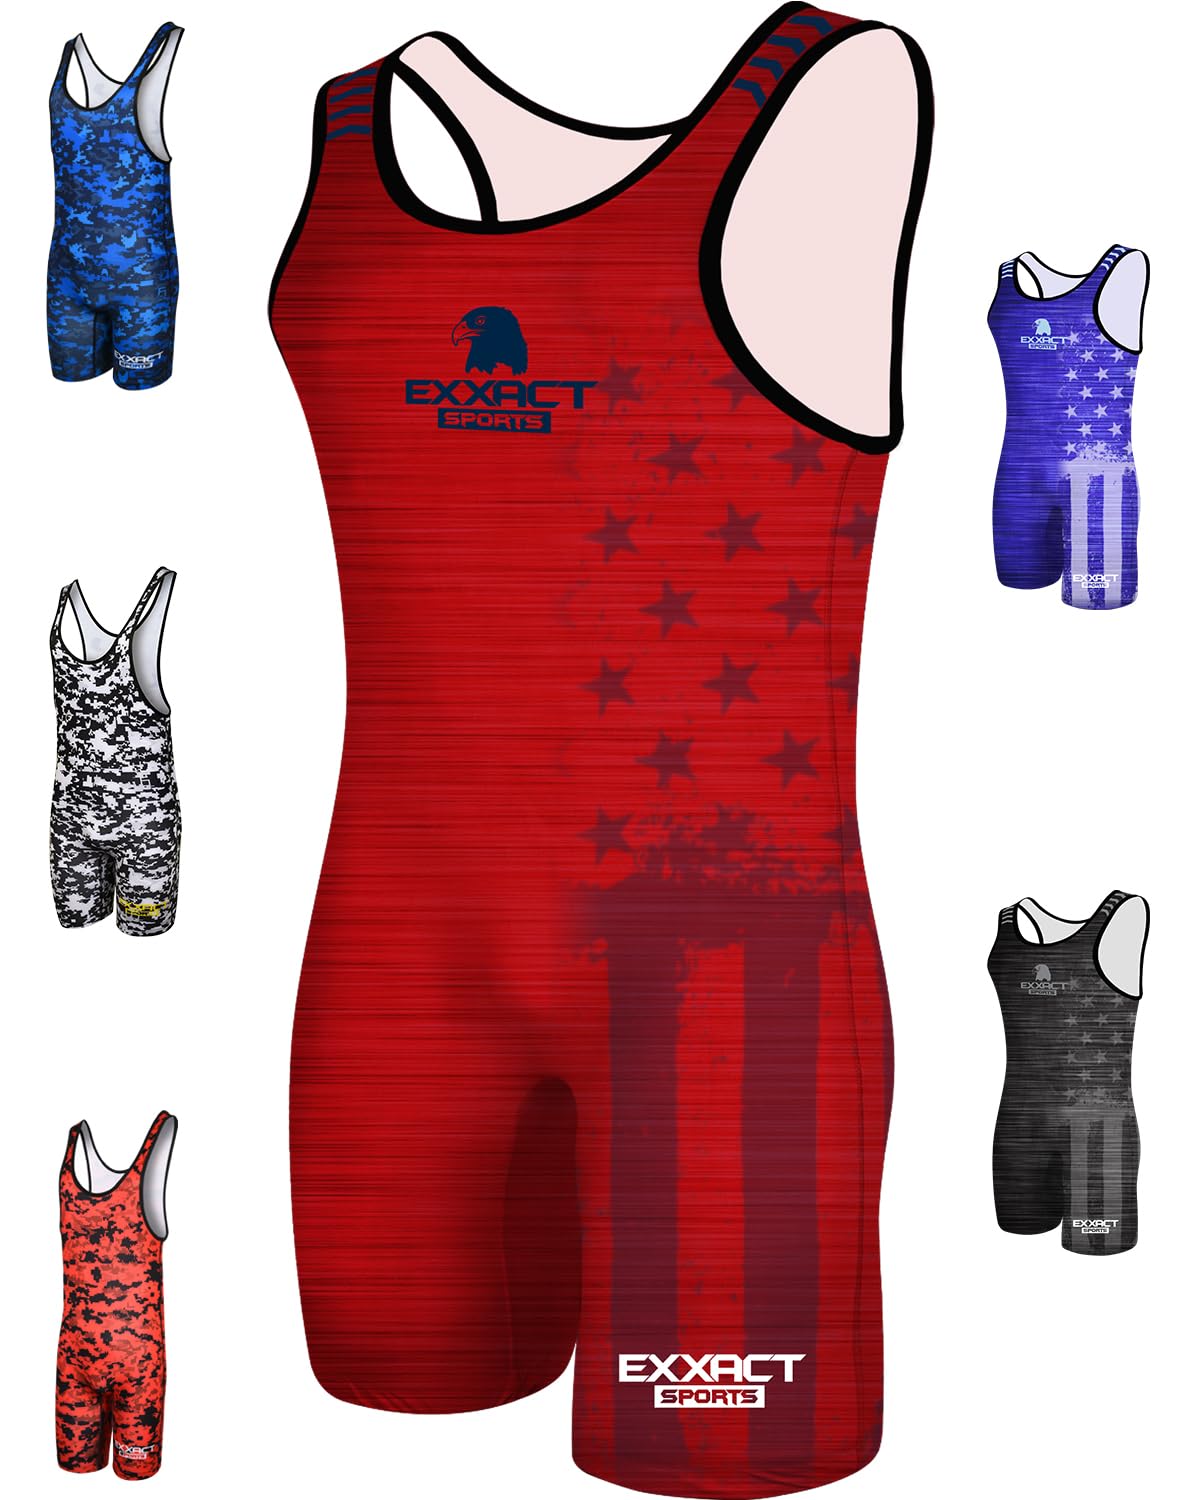 Exxact Sports Patriot Wrestling Singlet for MMA, Powerlifting Singlet Youth Wrestling Singlet Men for Training, Weightlifting (A